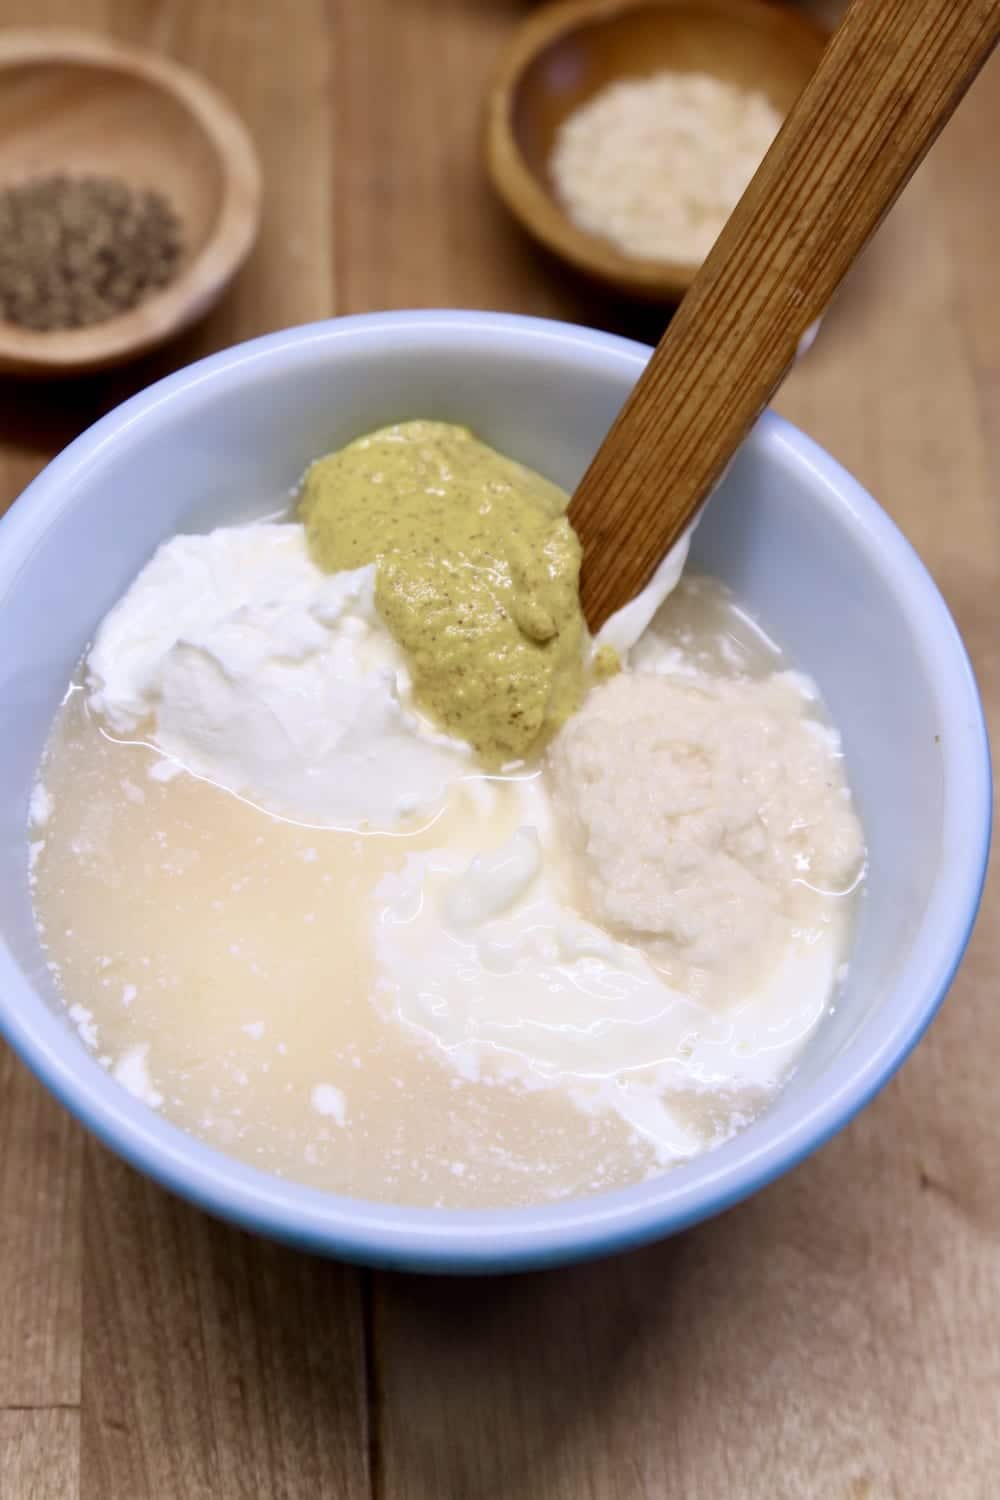 Bowl with mayo, sour cream, mustard, lemon juice with wood handle spoon